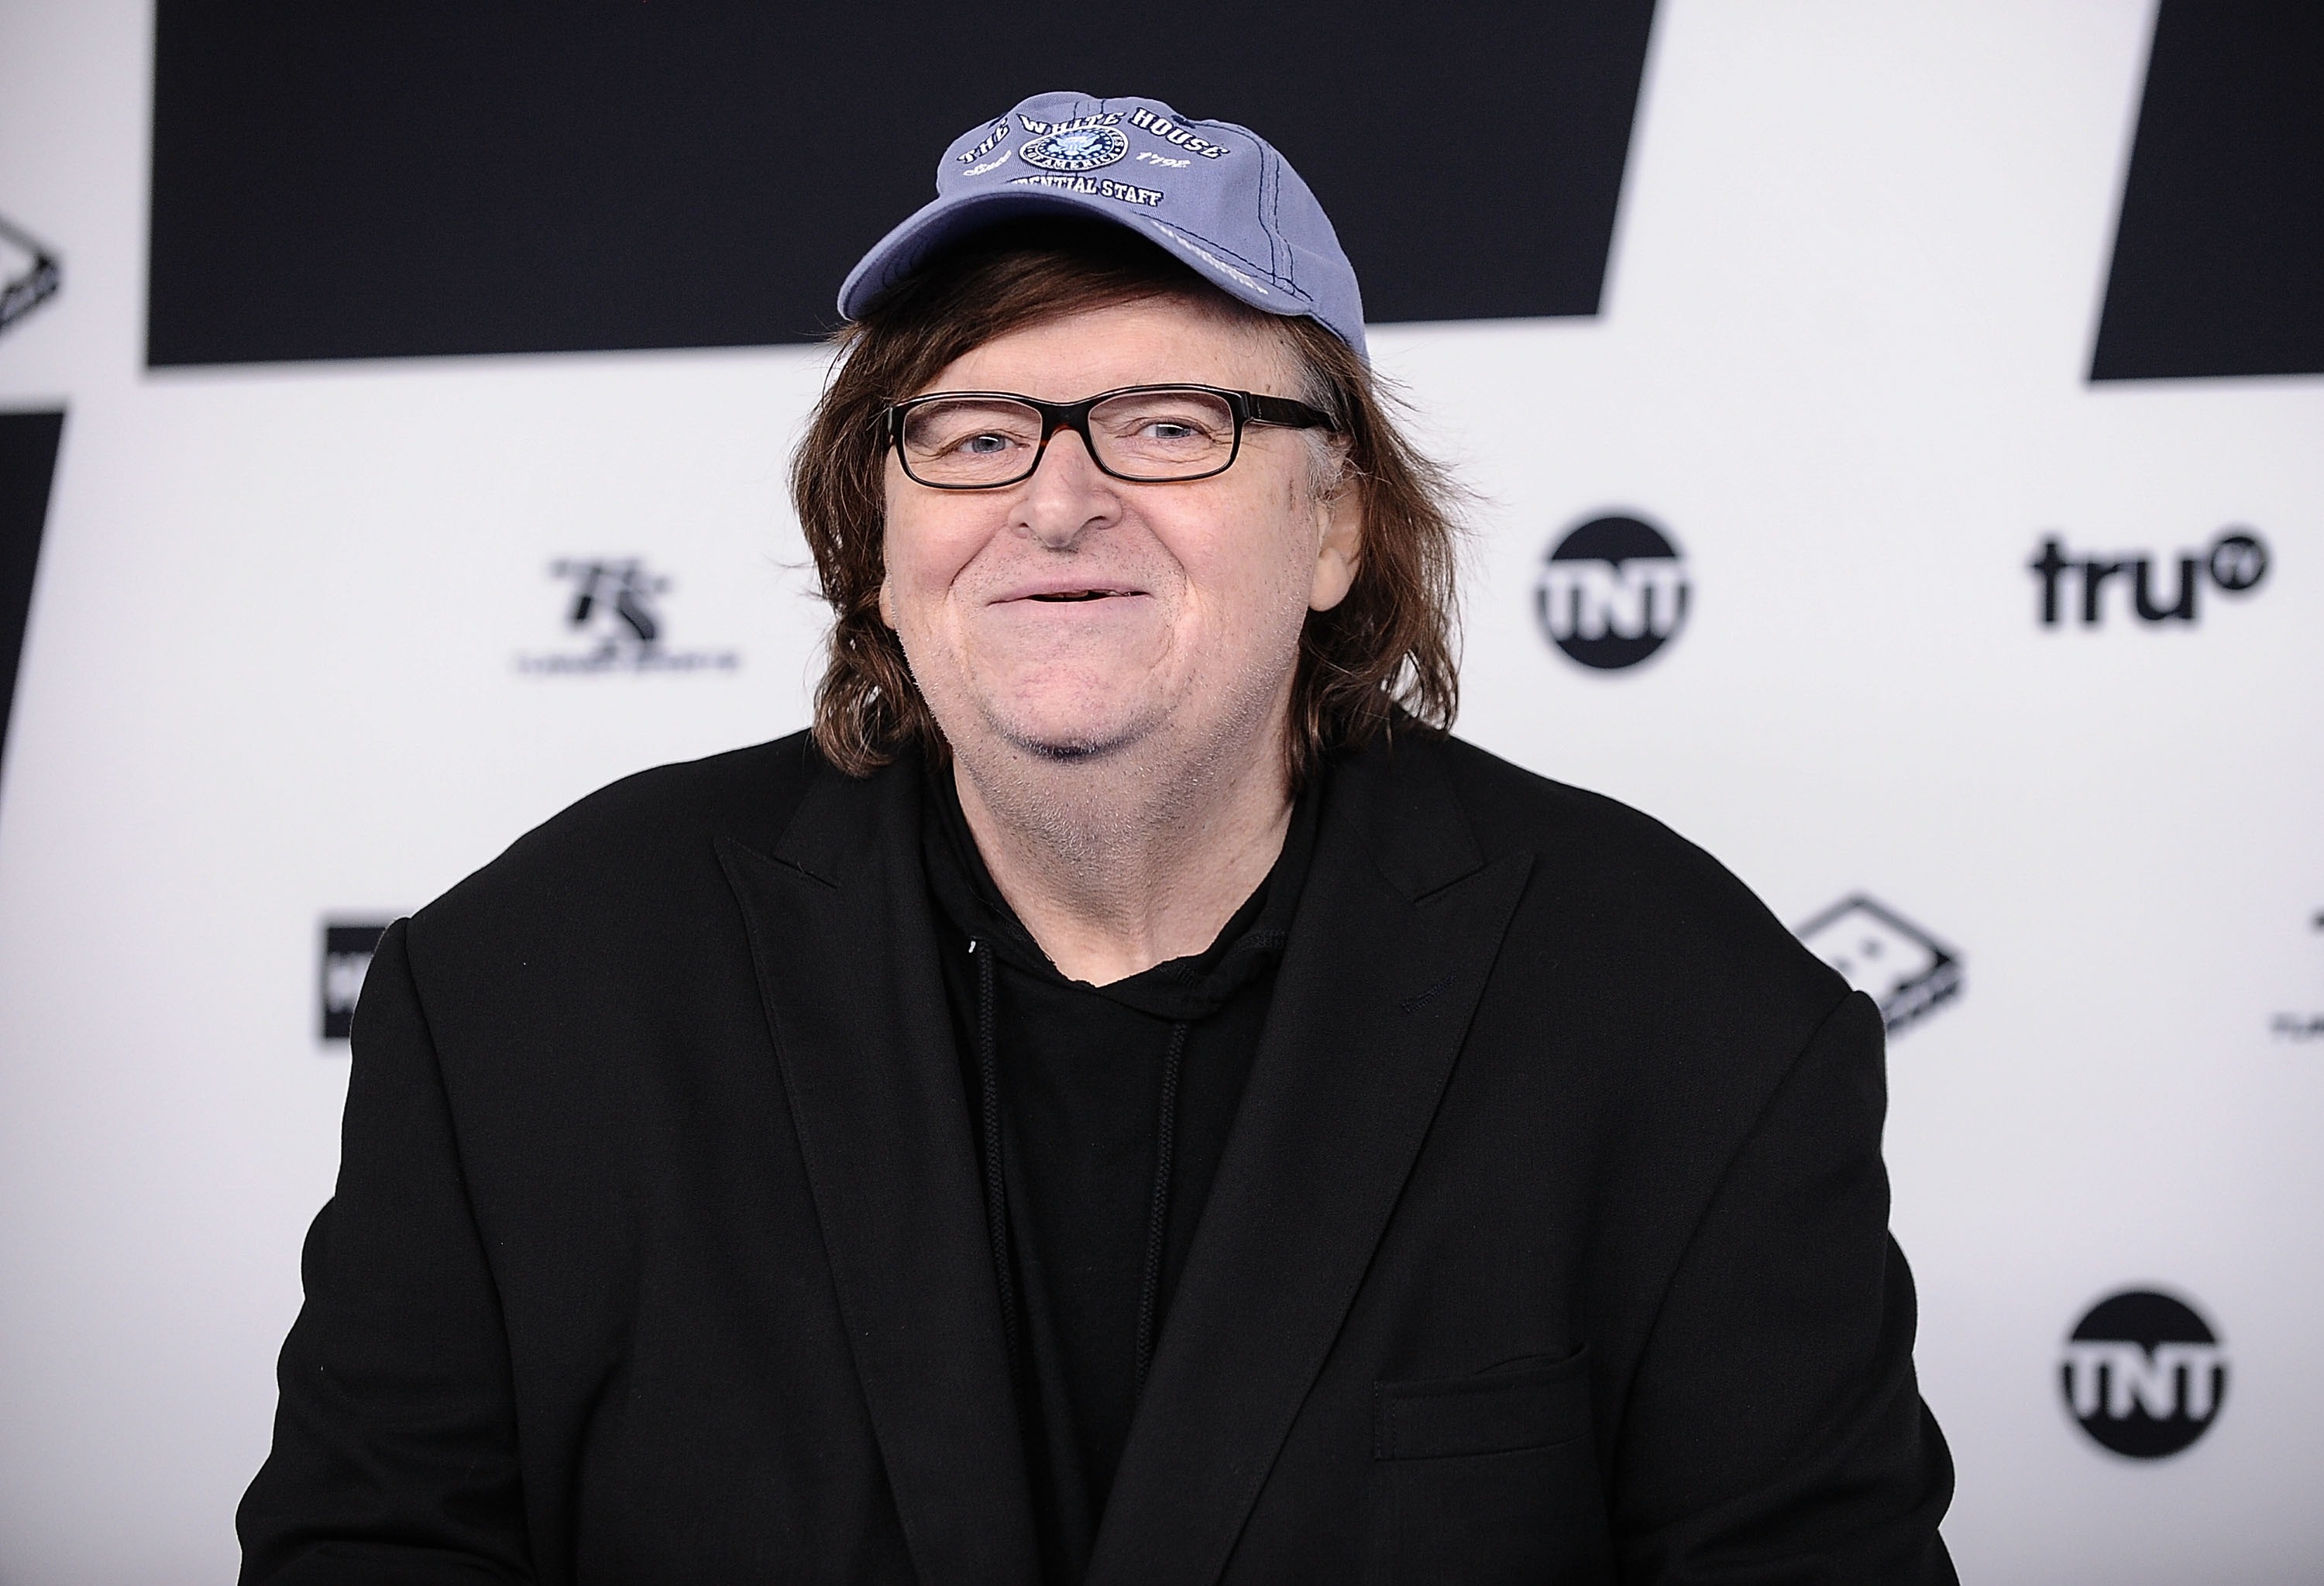 Michael Moore attends at Madison Square Garden in New York on May 17, 2017. (Daniel Zuchnik—WireImage/Getty Images)